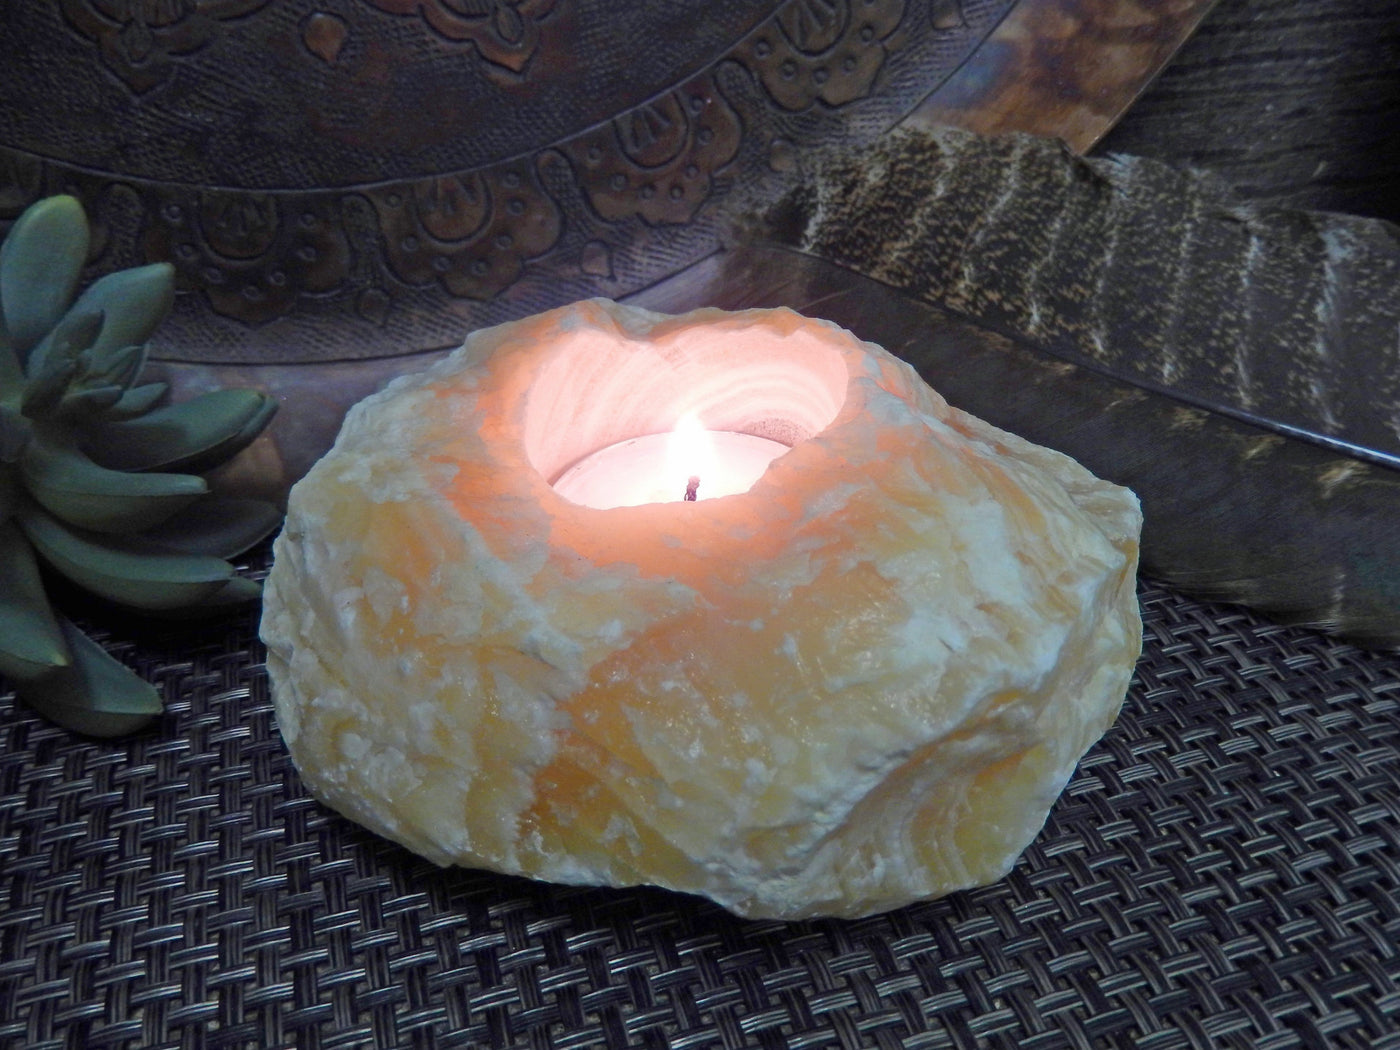 Mexican Orange Calcite Candle Holder, lit and on display